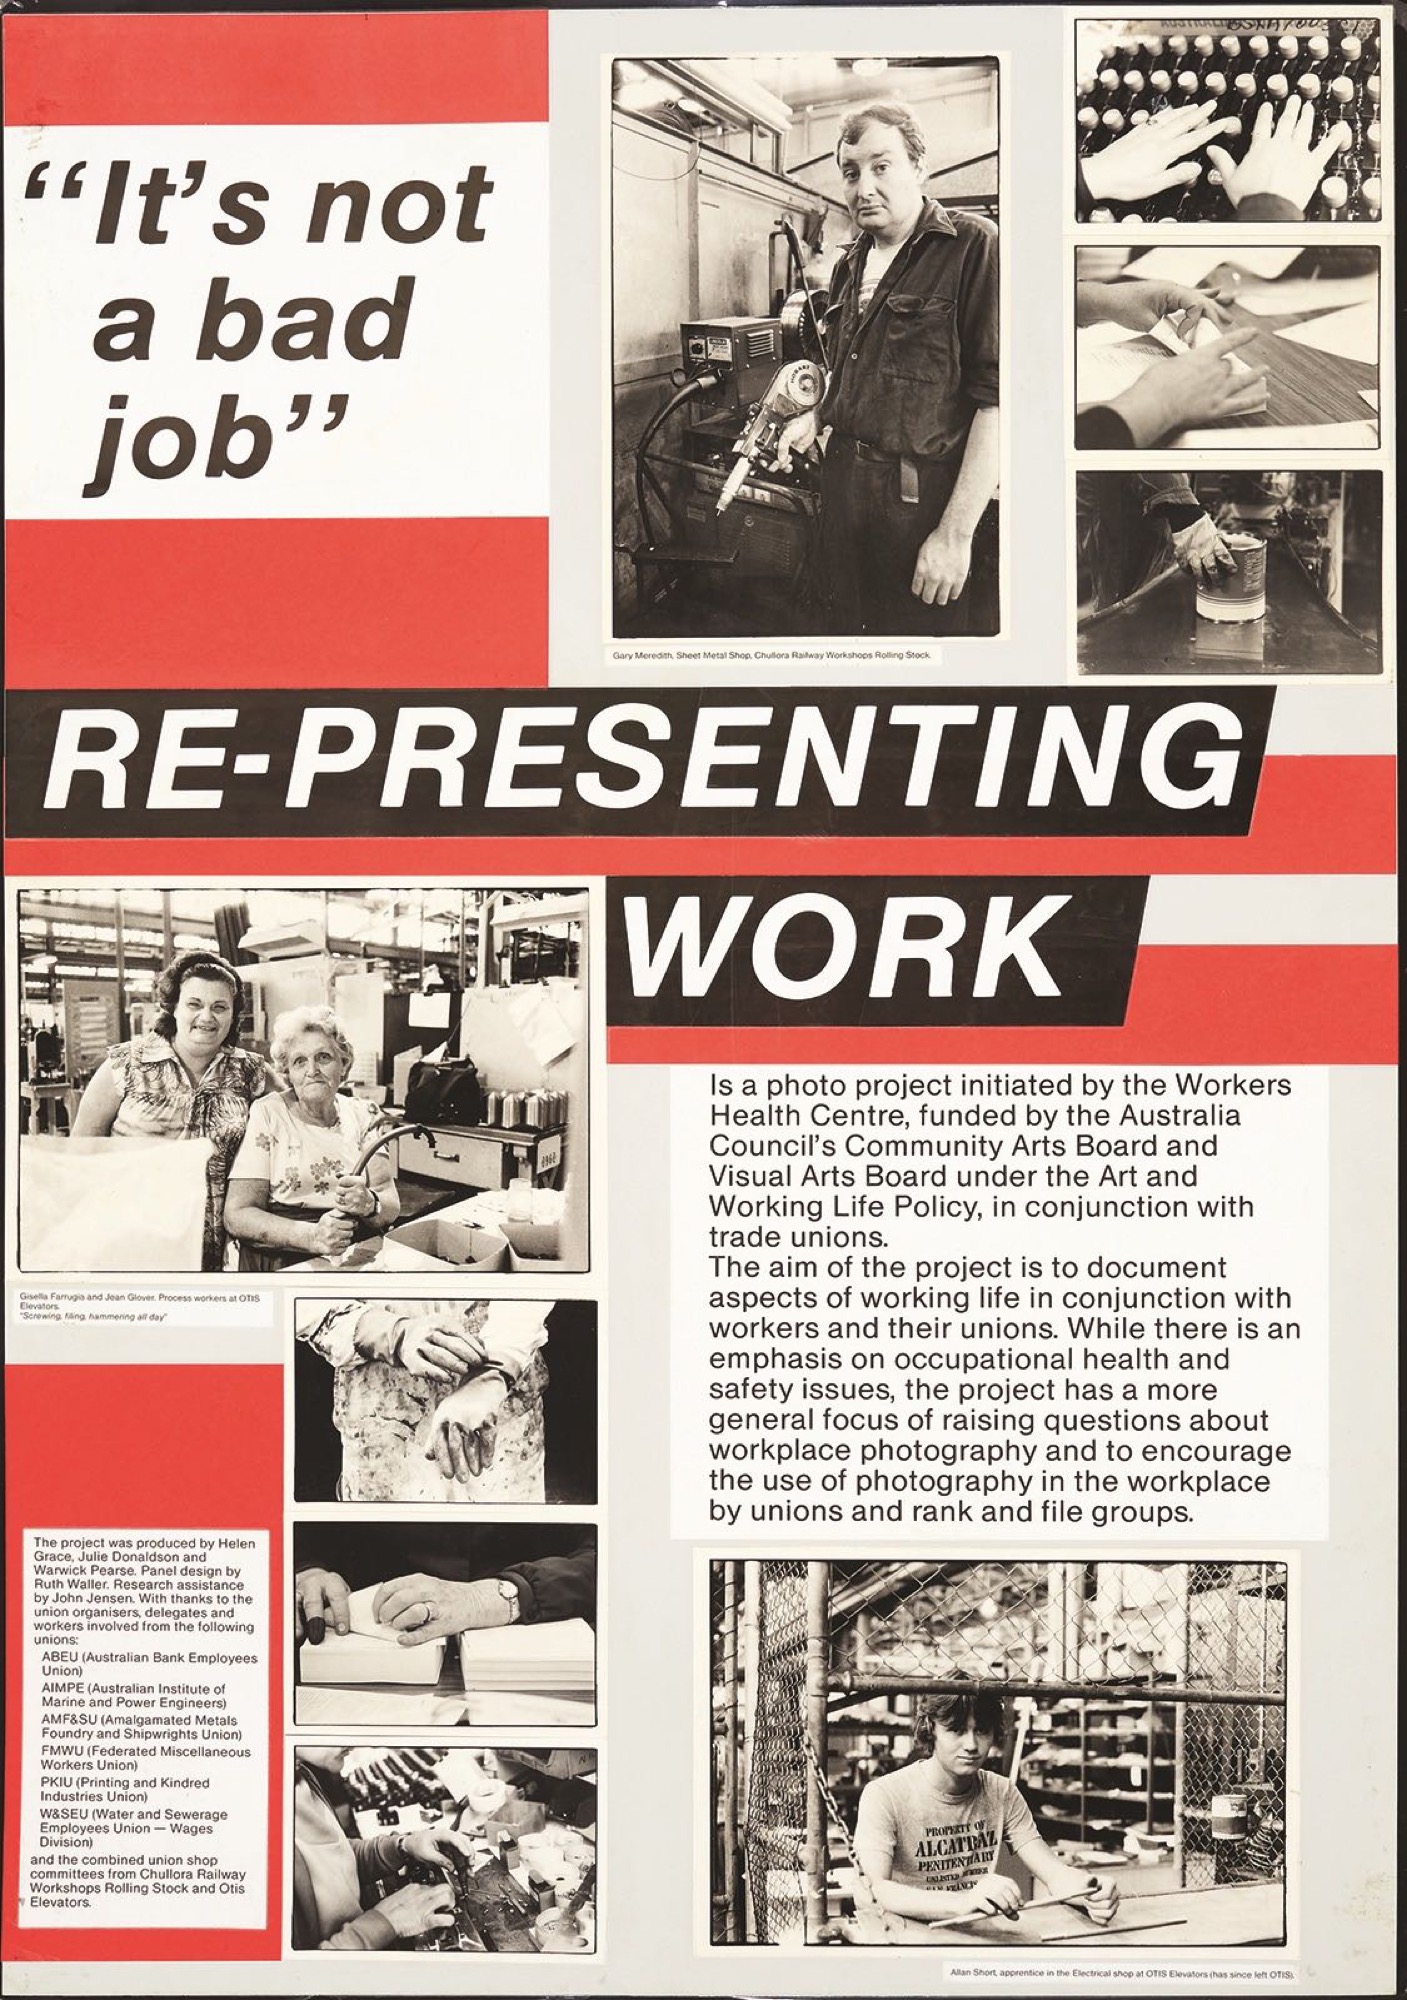 Julie Donaldson, Helen Grace and Warwick Pearse, <em>&#39;It&#39;s not a bad job&#39;: Re-presenting work,</em> 1984, Laminated photo panels. Collection of Workers Health Centre. Image courtesy of The Ian Potter Museum of Art.